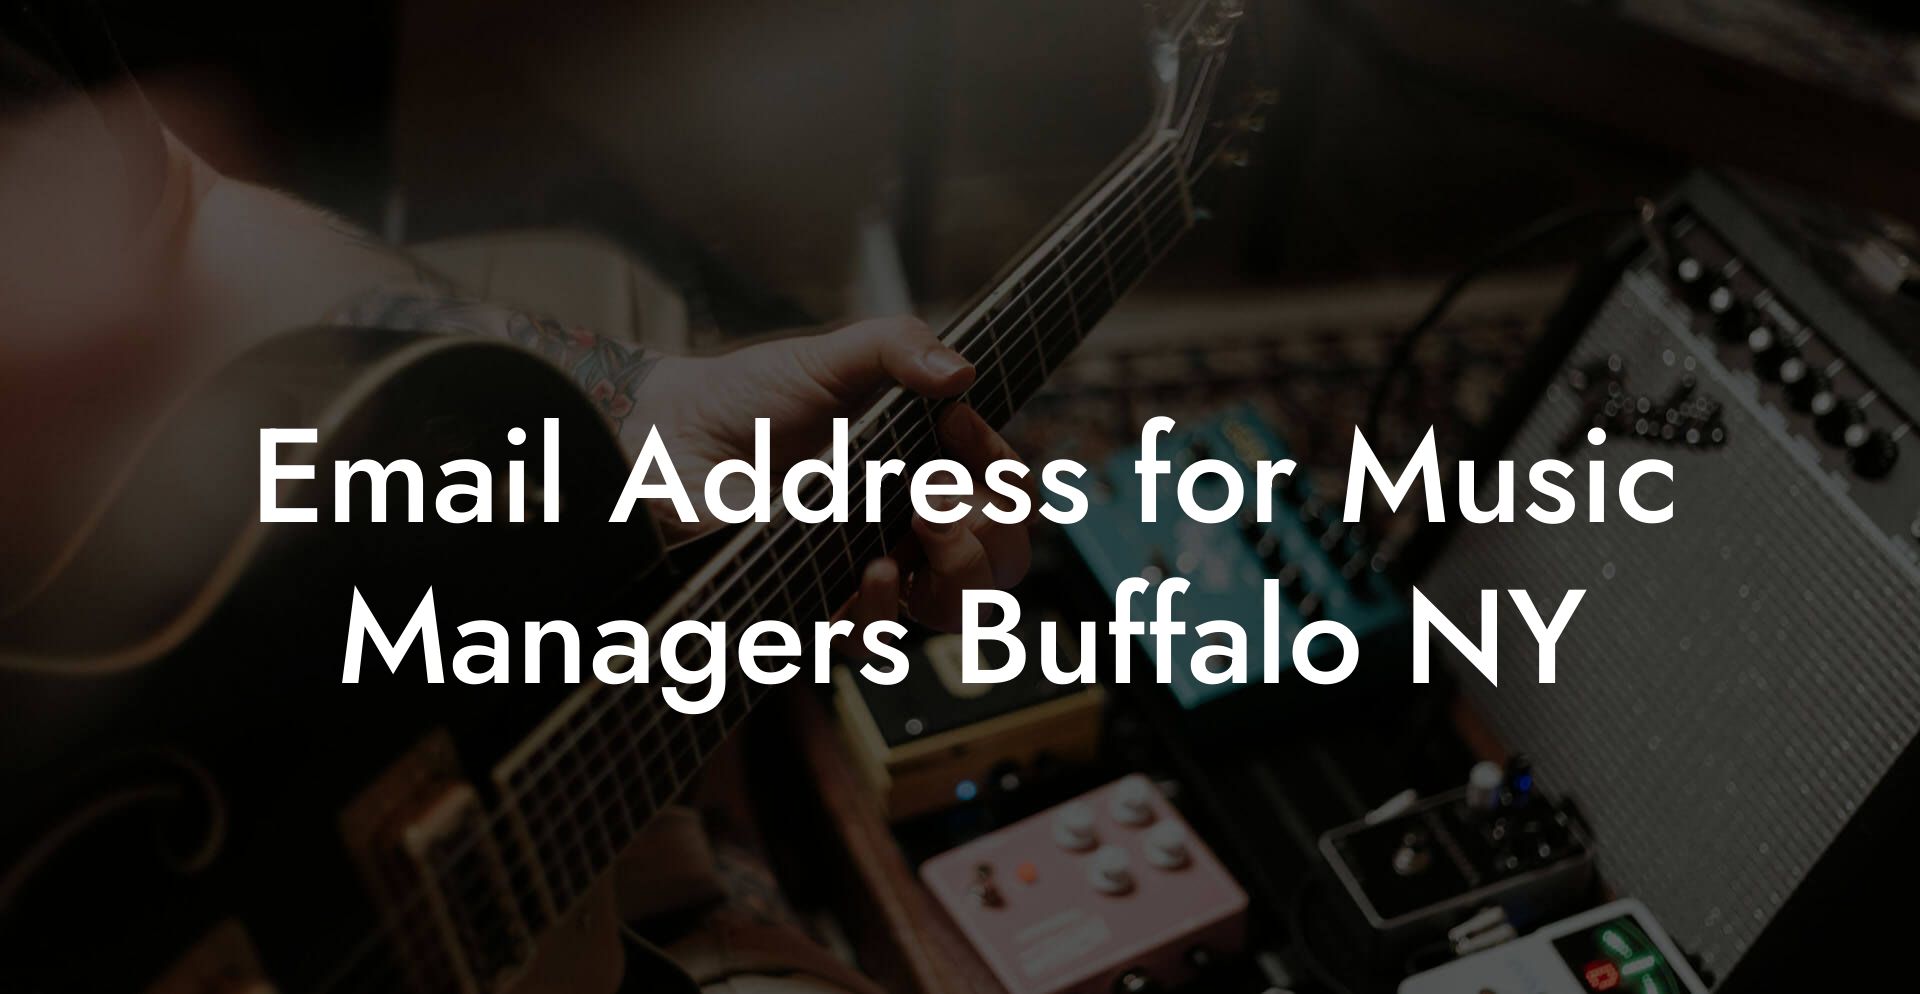 Email Address for Music Managers Buffalo NY